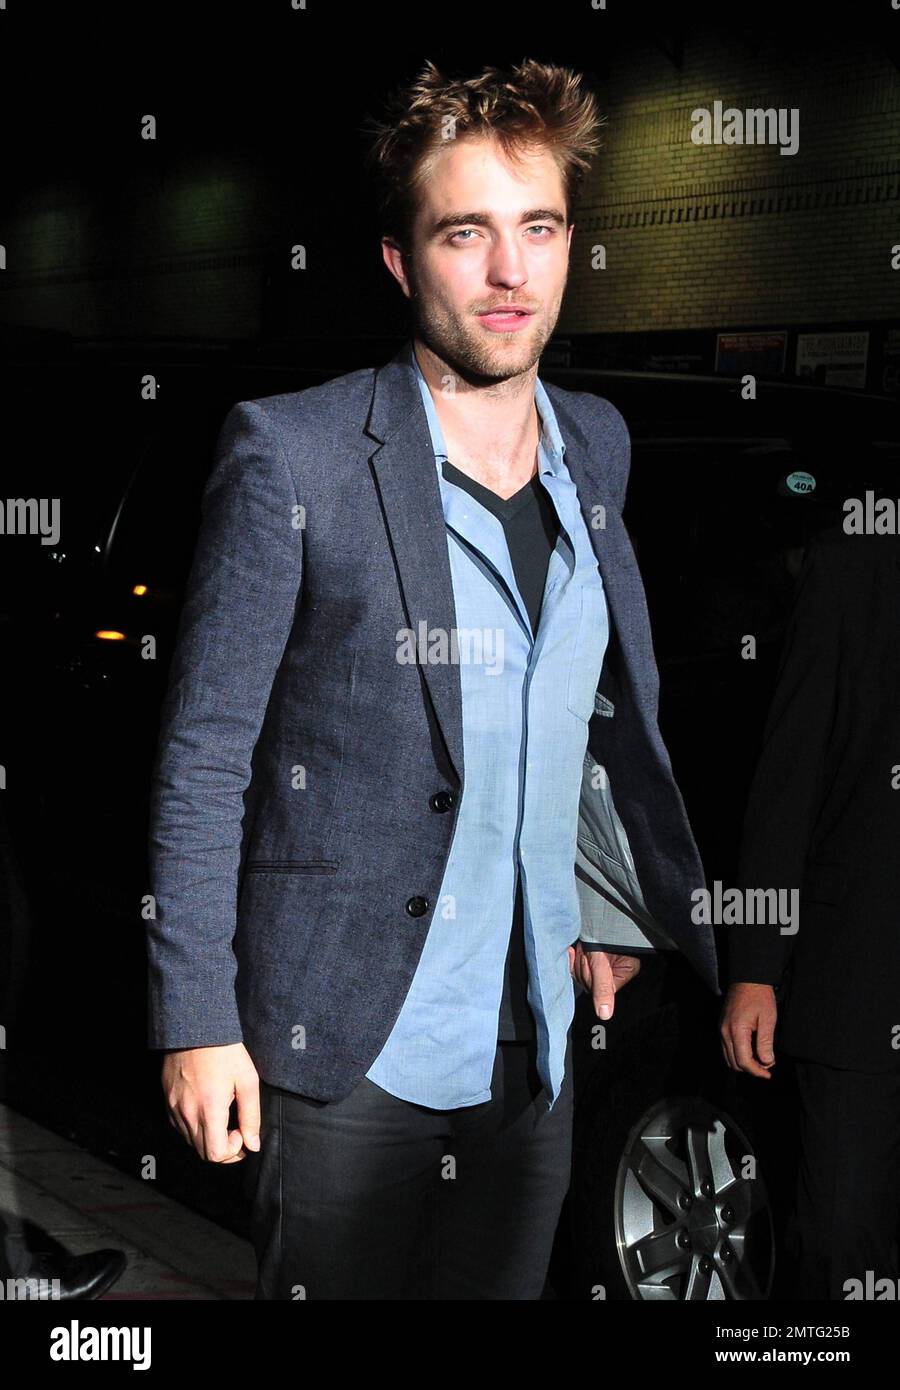 'Twilight Saga' star Robert Pattinson poses for photos outside the 'Late Show with David Letterman' studios. Pattinson, best known for his character Edward Cullen, is currently promoting the latest movie in the series 'Breaking Dawn Part 1' due in theaters on November 18. New York, NY. 8th November 2011. Stock Photo